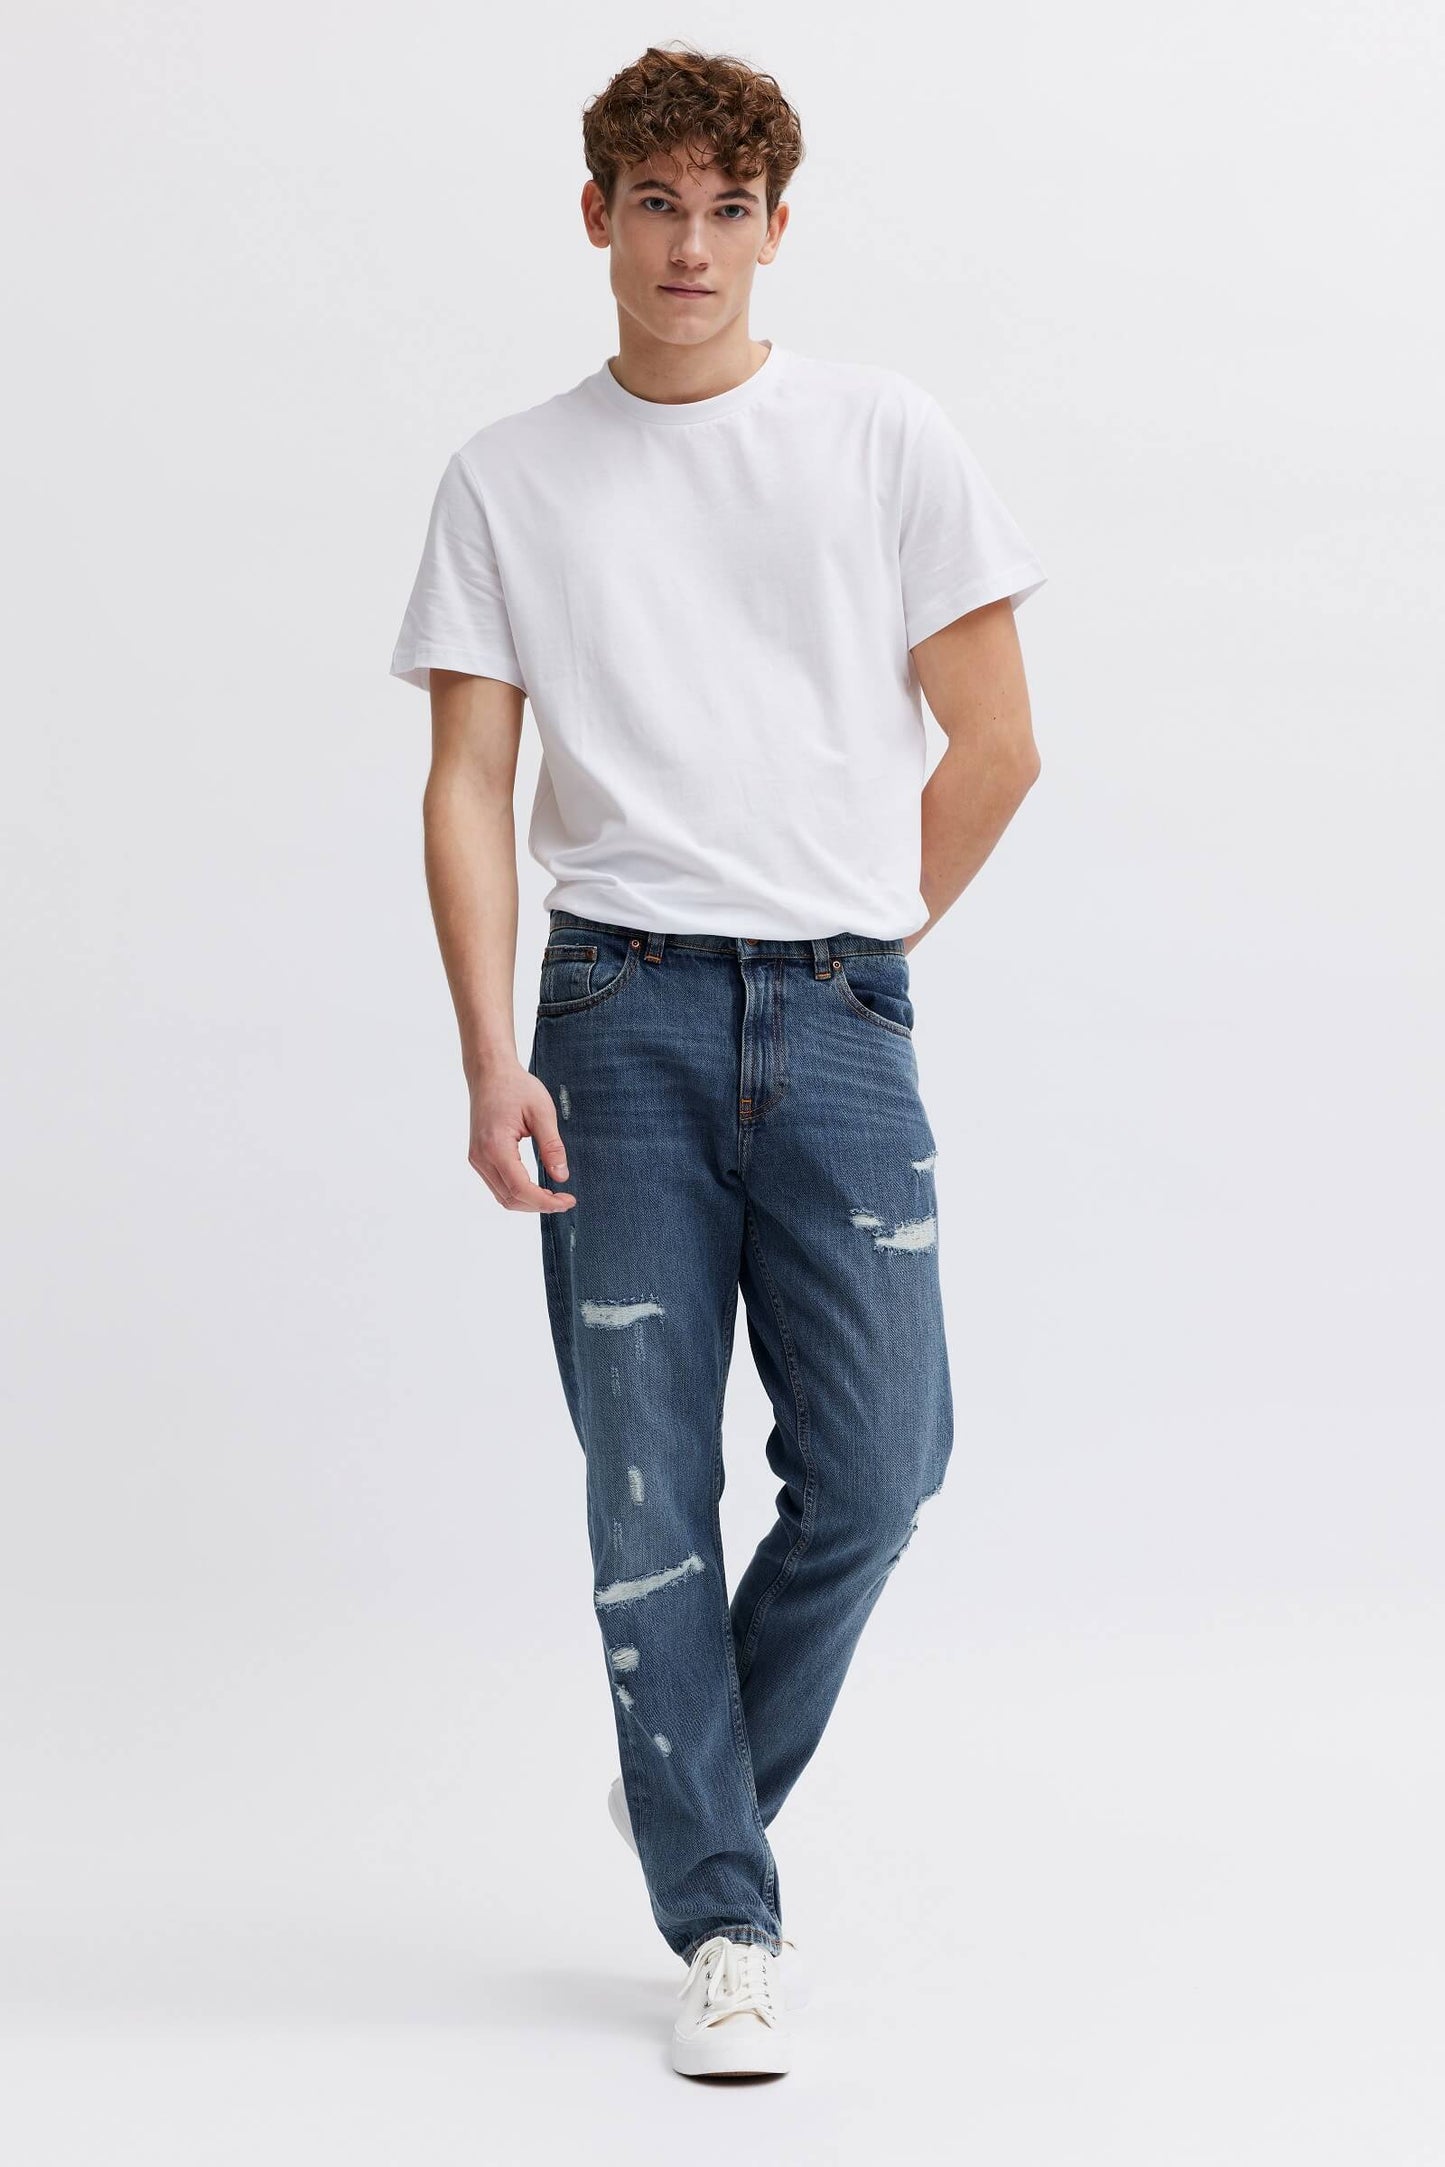 Organic cotton men's jeans with rips and distress detail